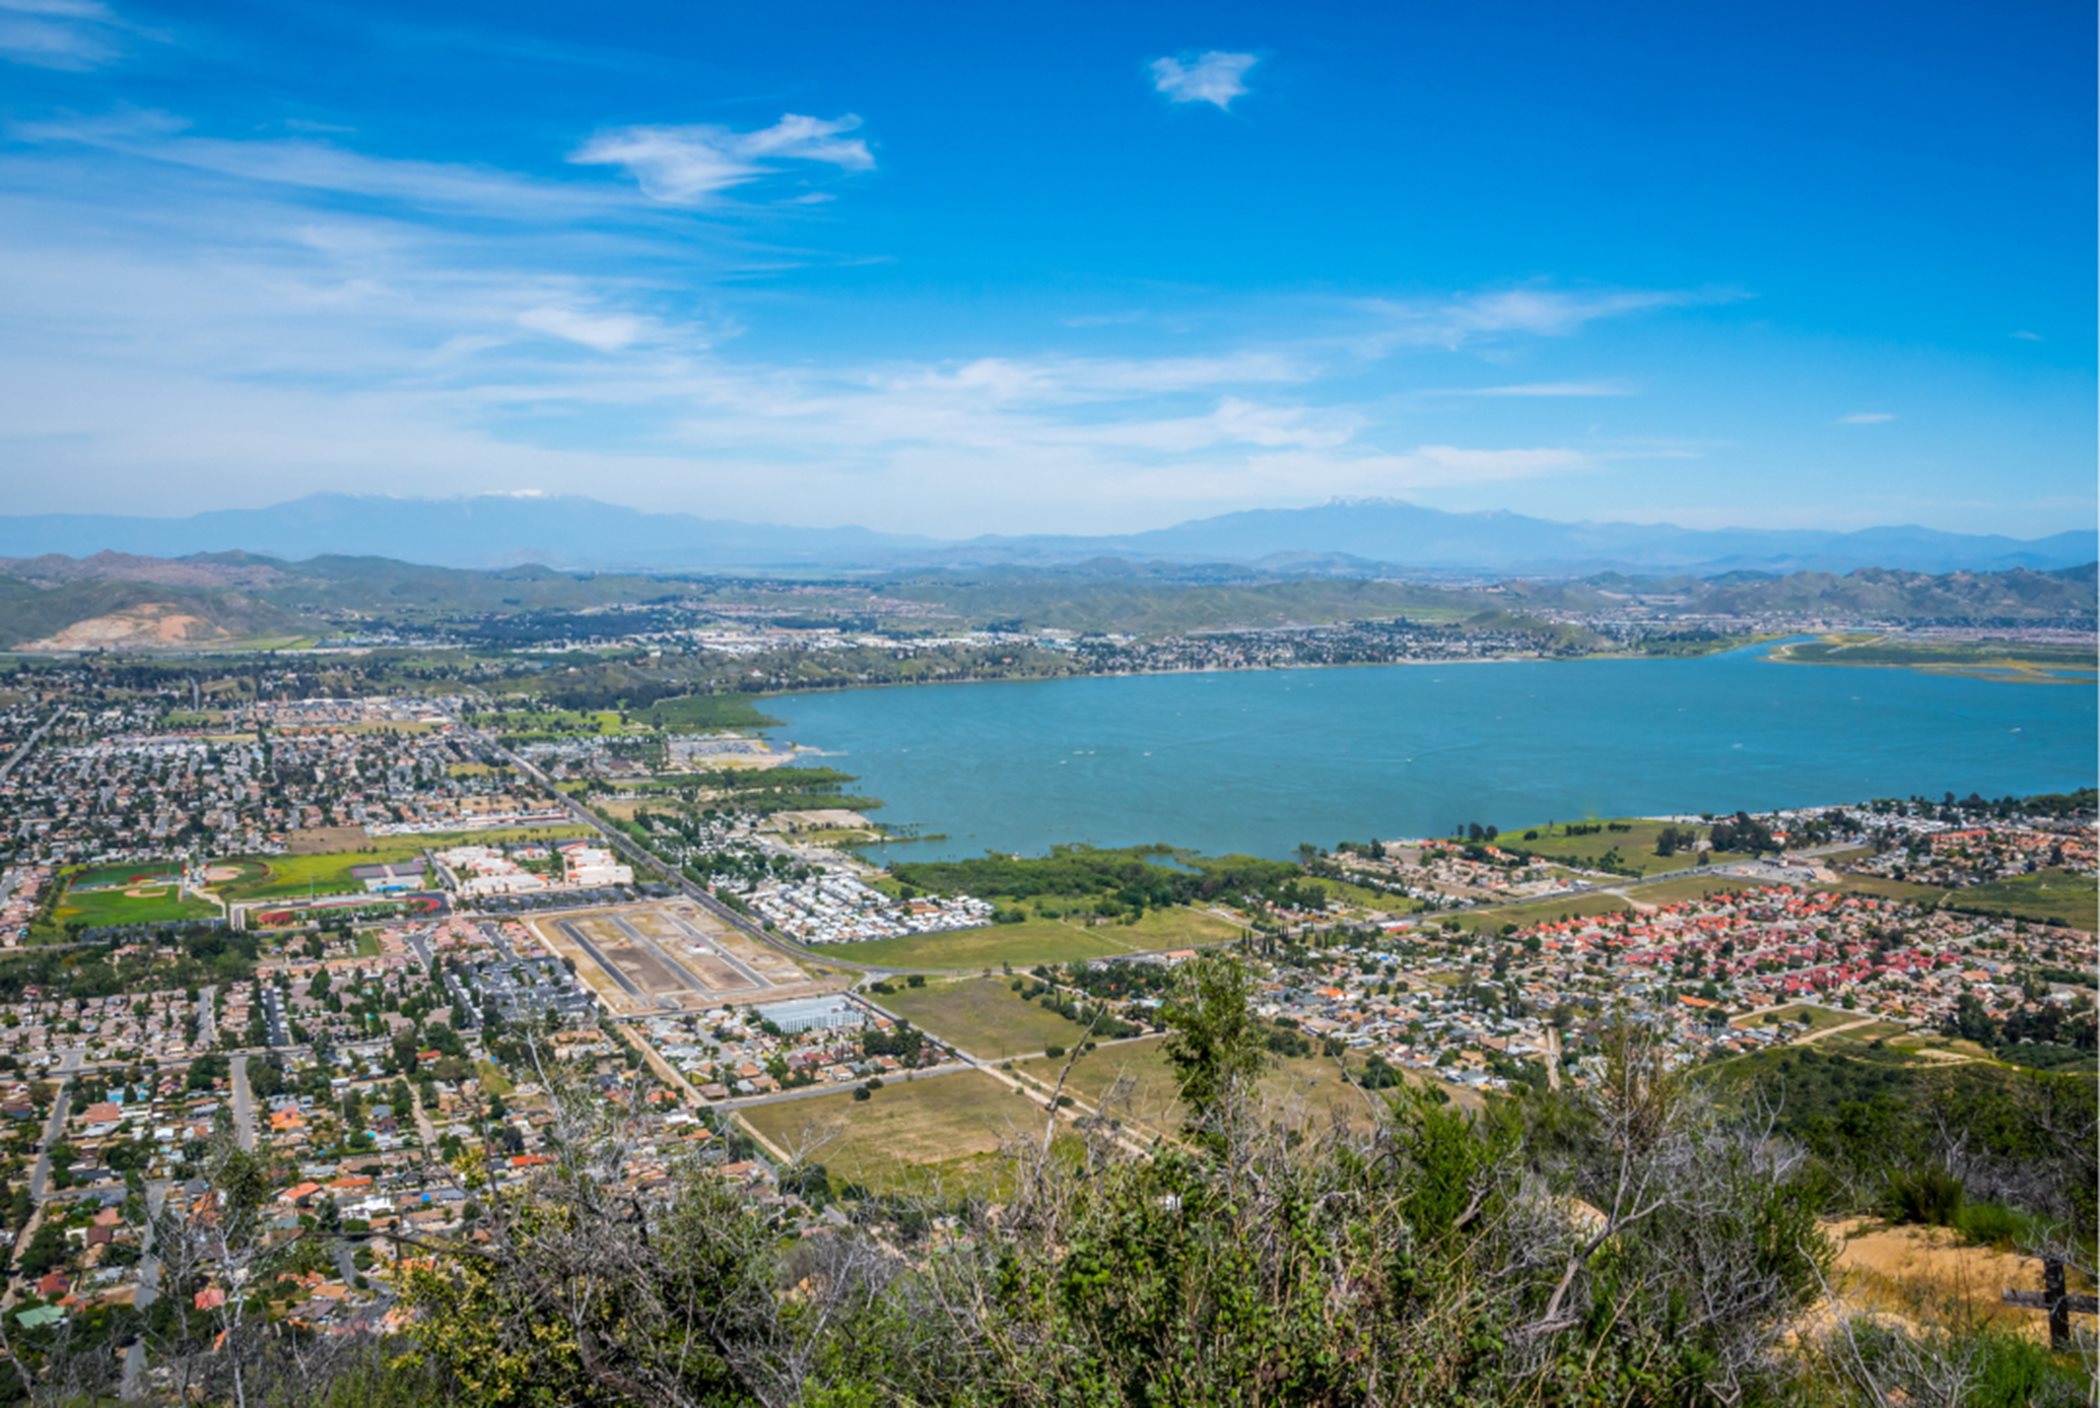 Aerial view of Lake Elsinore and the surrounding city